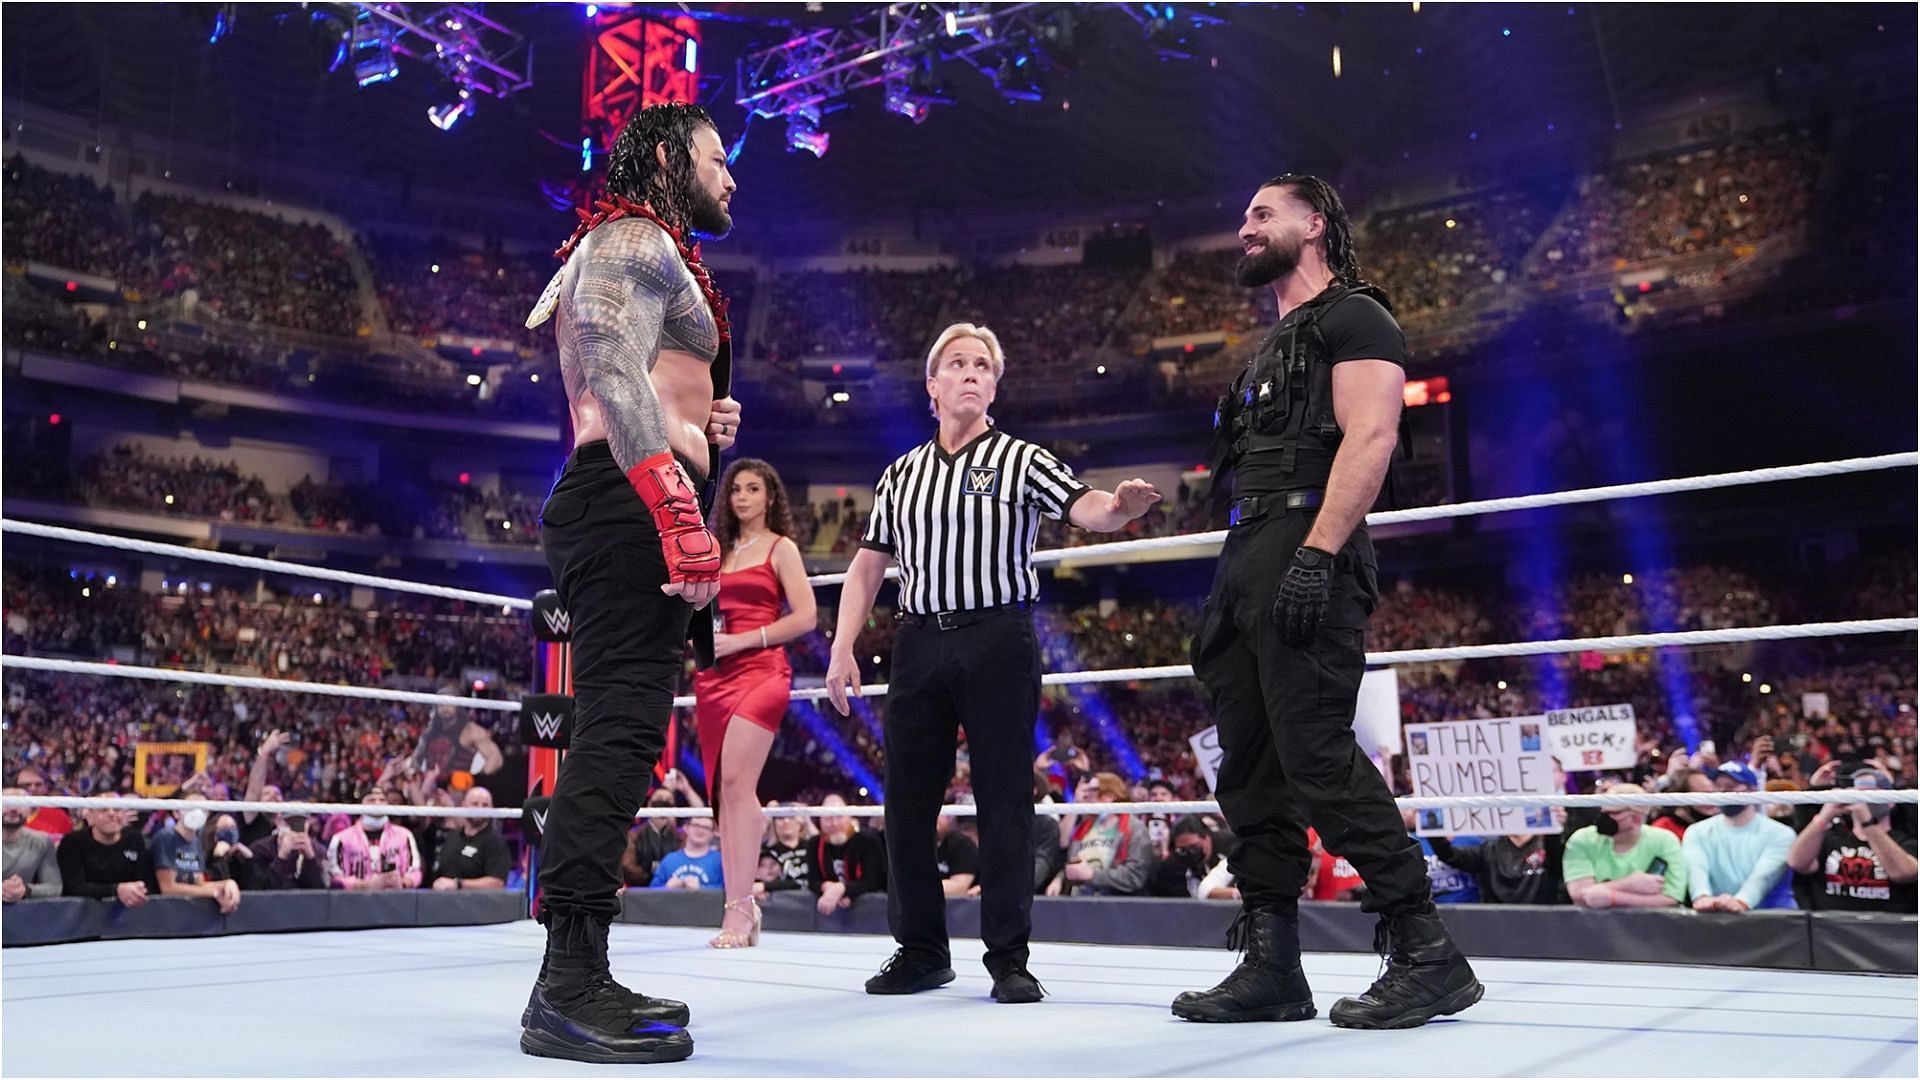 Rollins defeated Reigns at Royal Rumble 2022 by disqualification